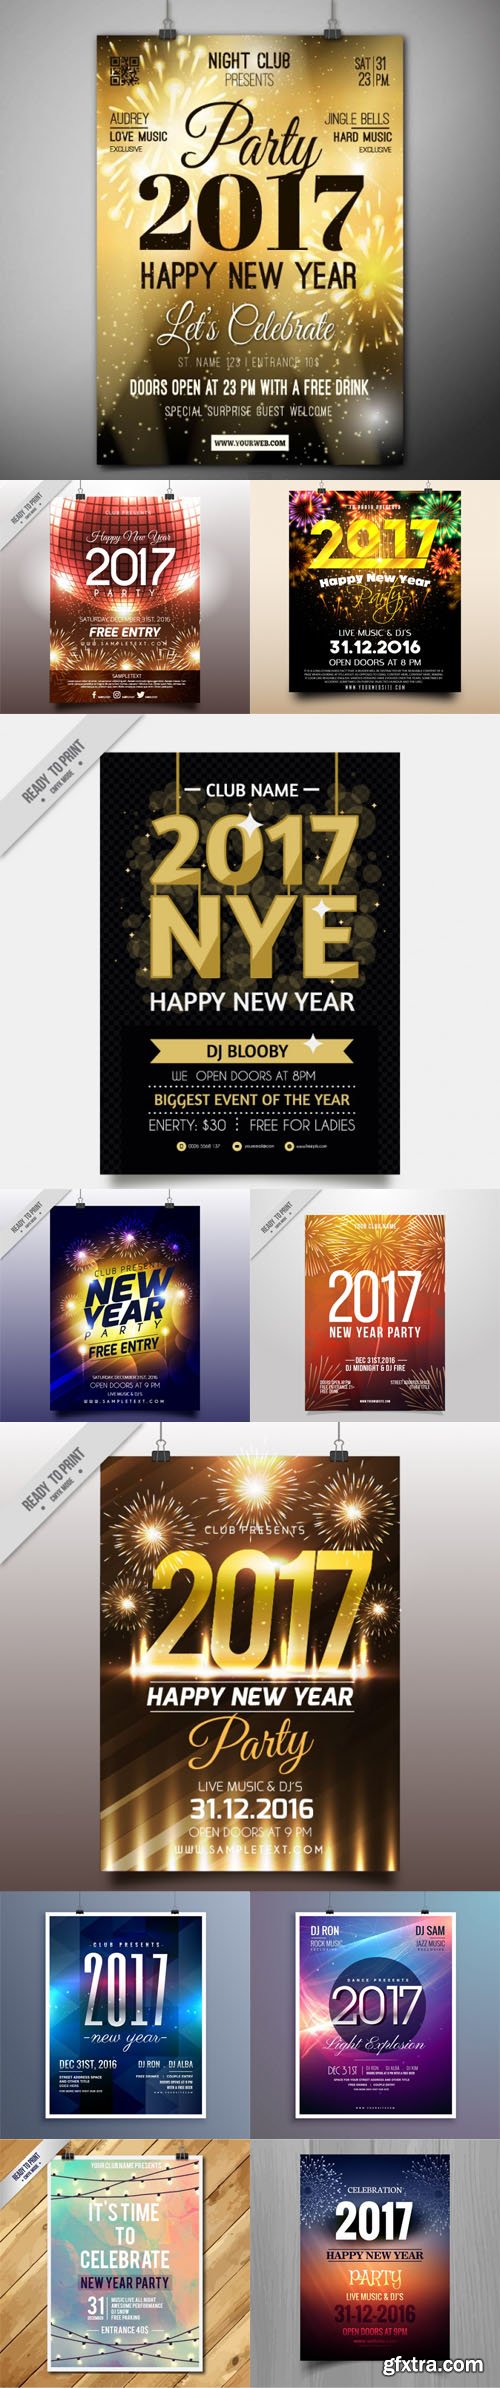 New Year 2017 Party Flyers/Posters Design Vector [11 Templates]